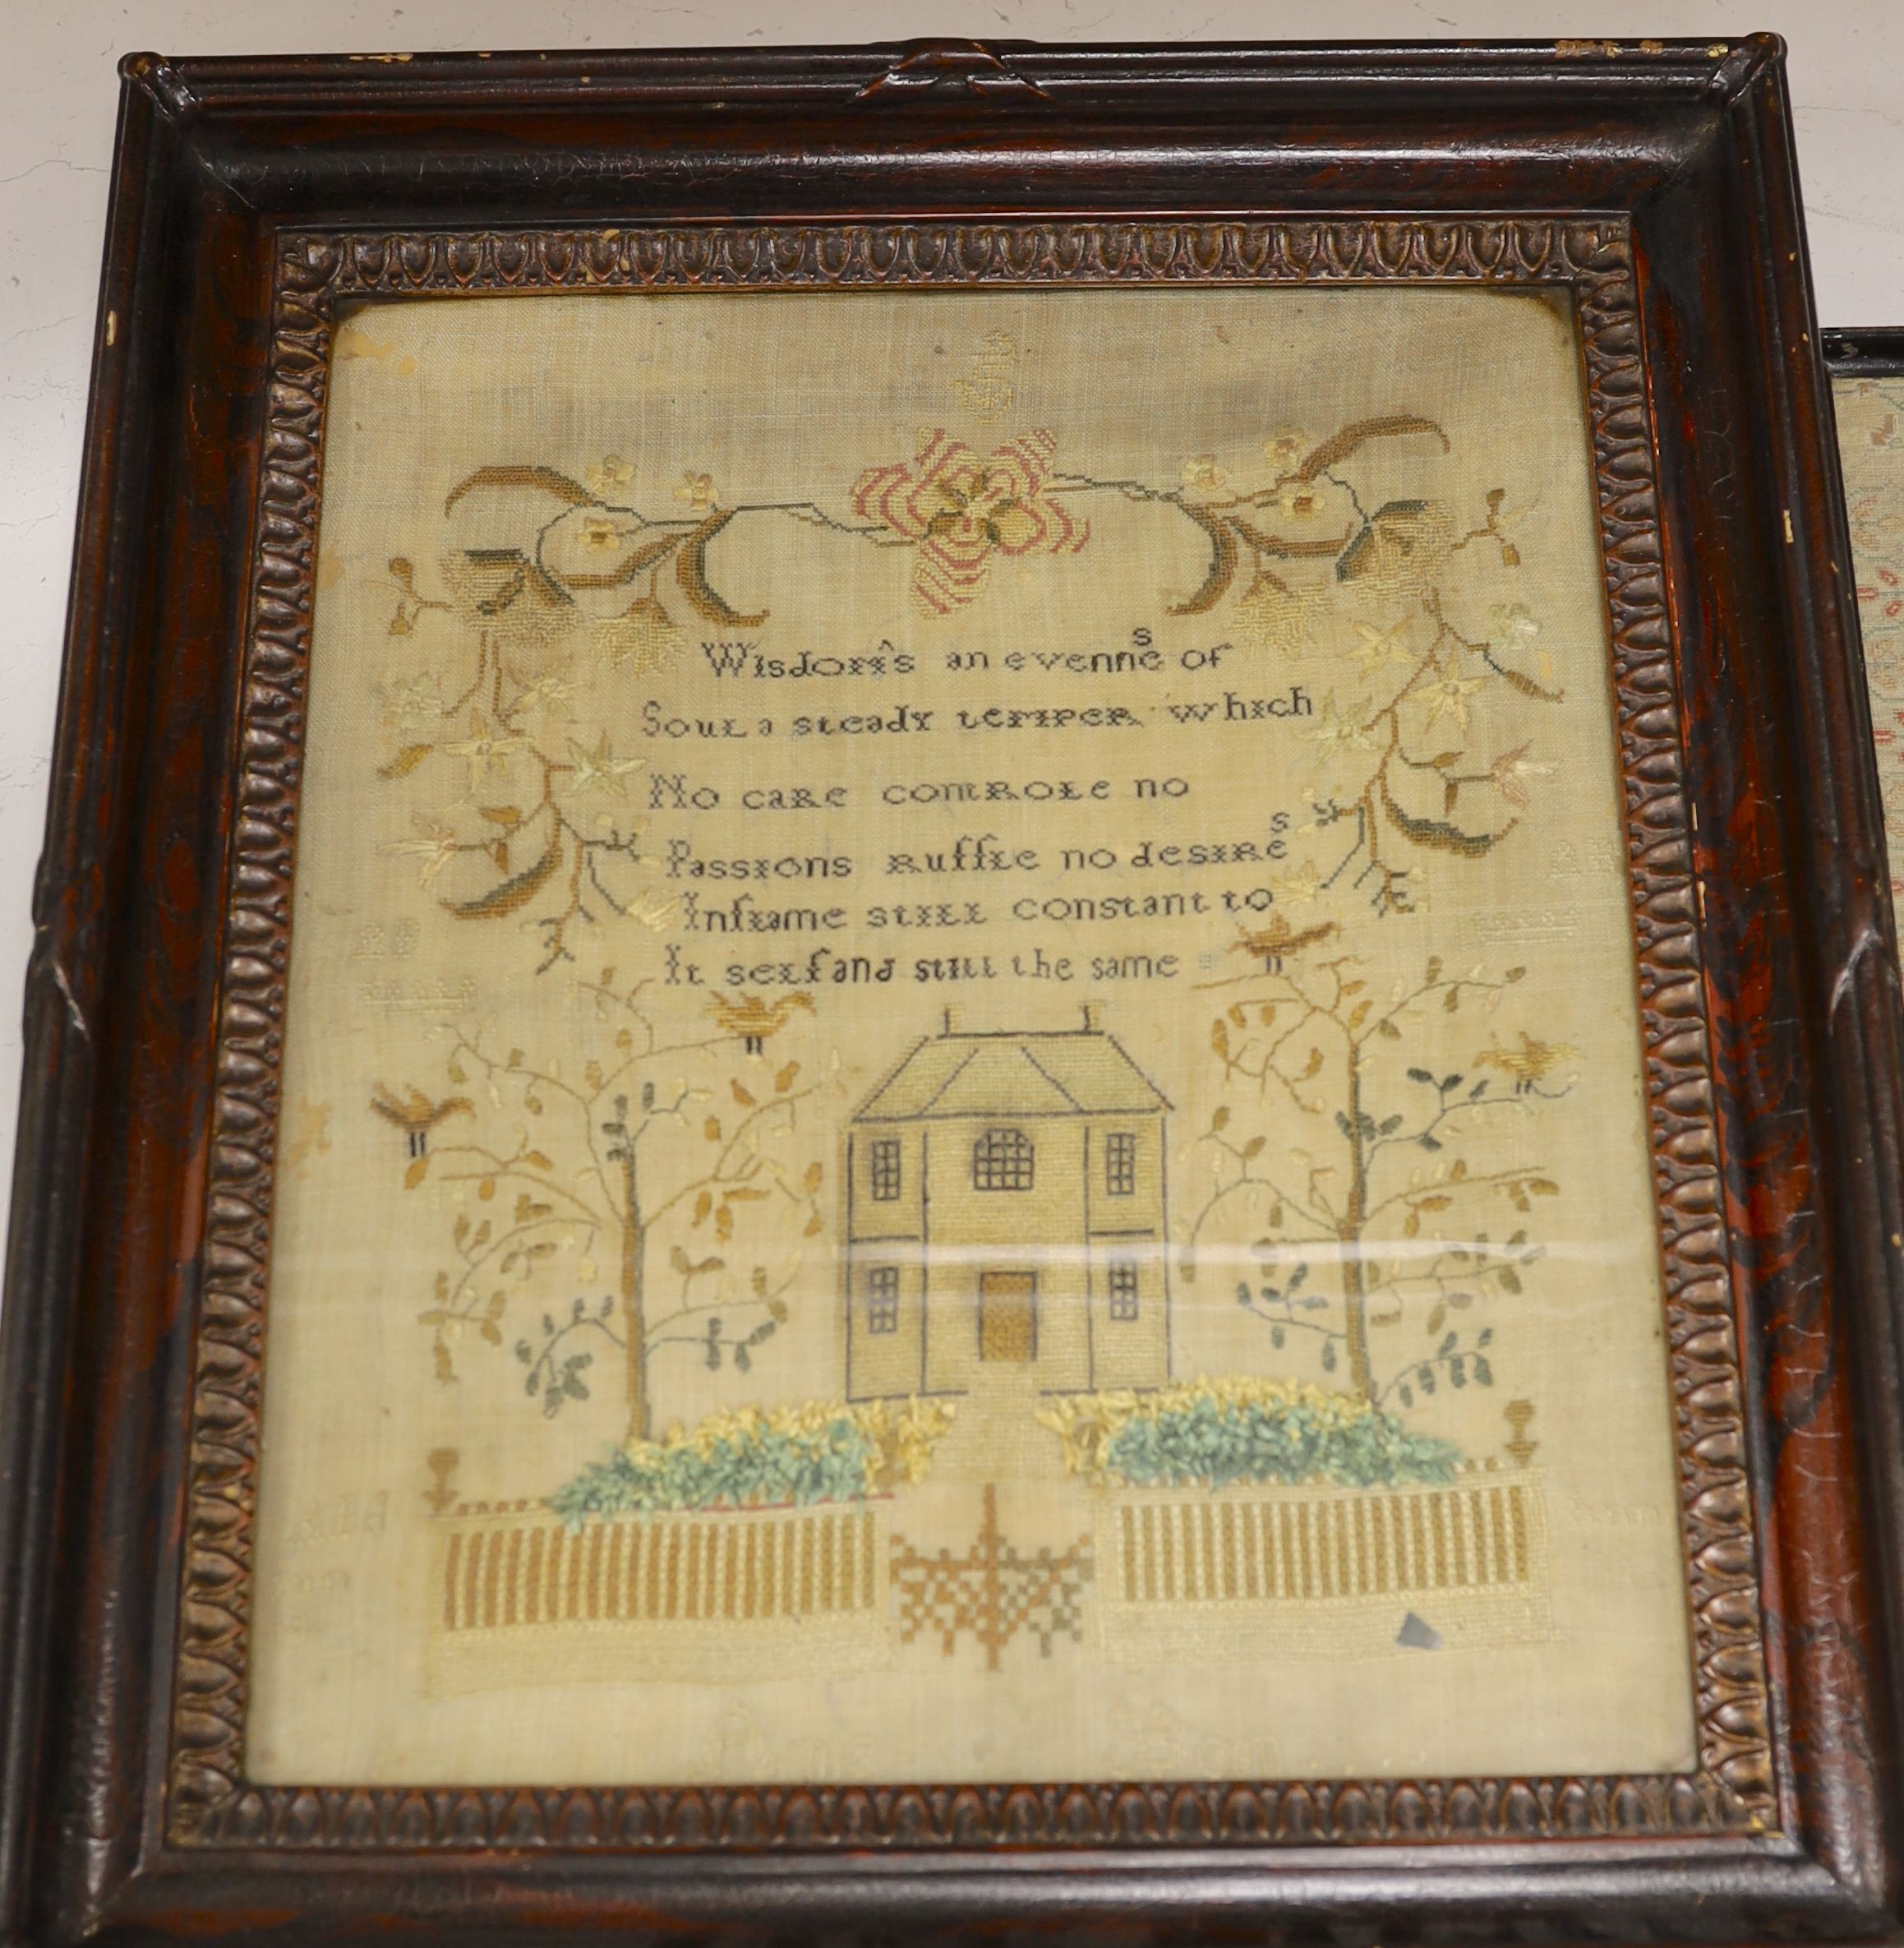 A George III finely embroidered Lords Prayer with angelic figure, flowers and text, 31 x 22cm, together with a later sampler, embroidered with house and trees, 35 x 29.5cm, both framed.